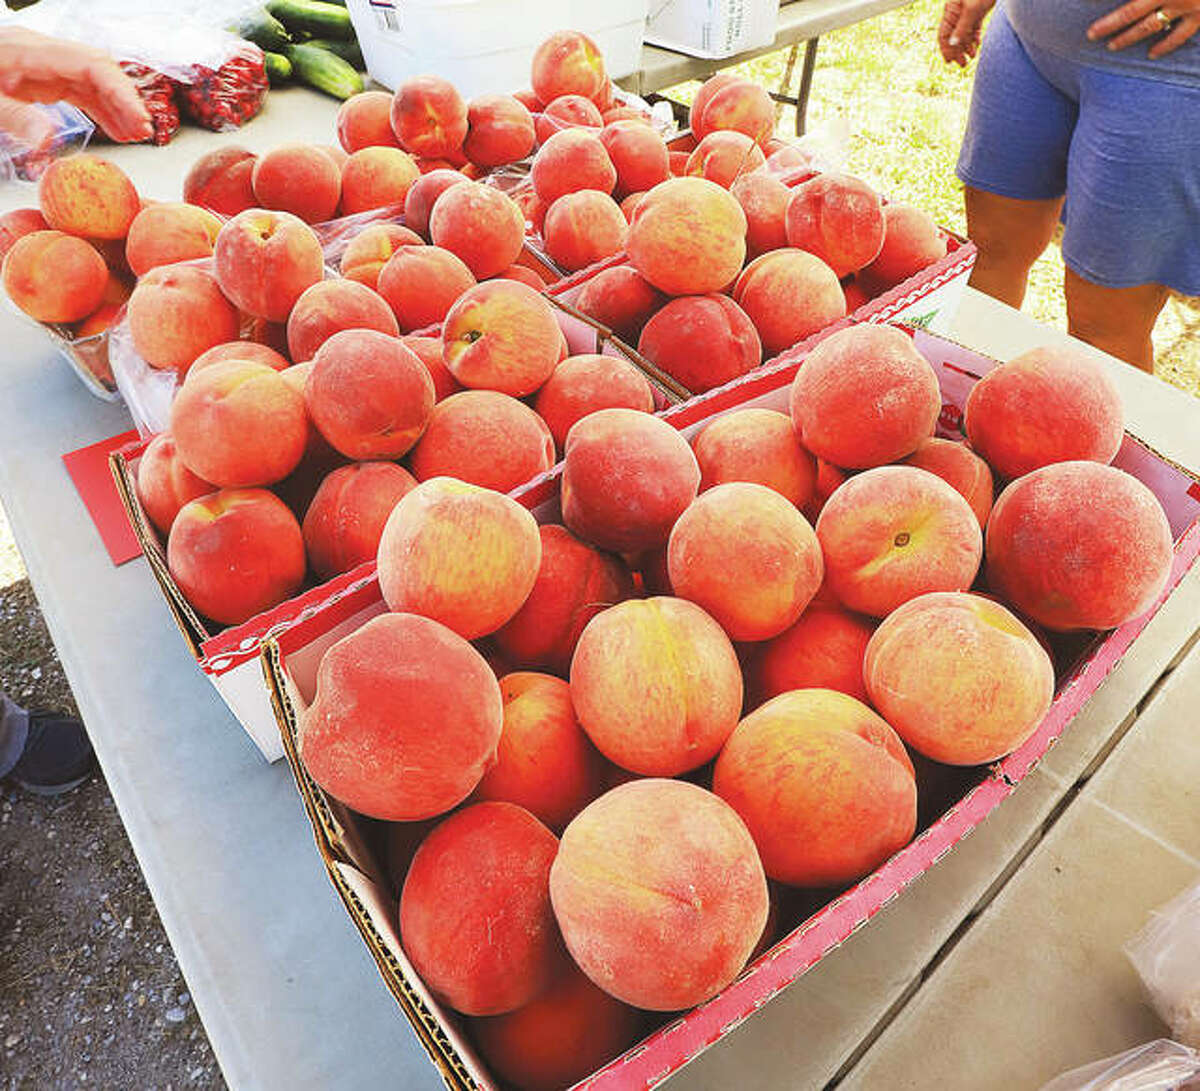 Why Calhoun County peaches are some of the sweetest